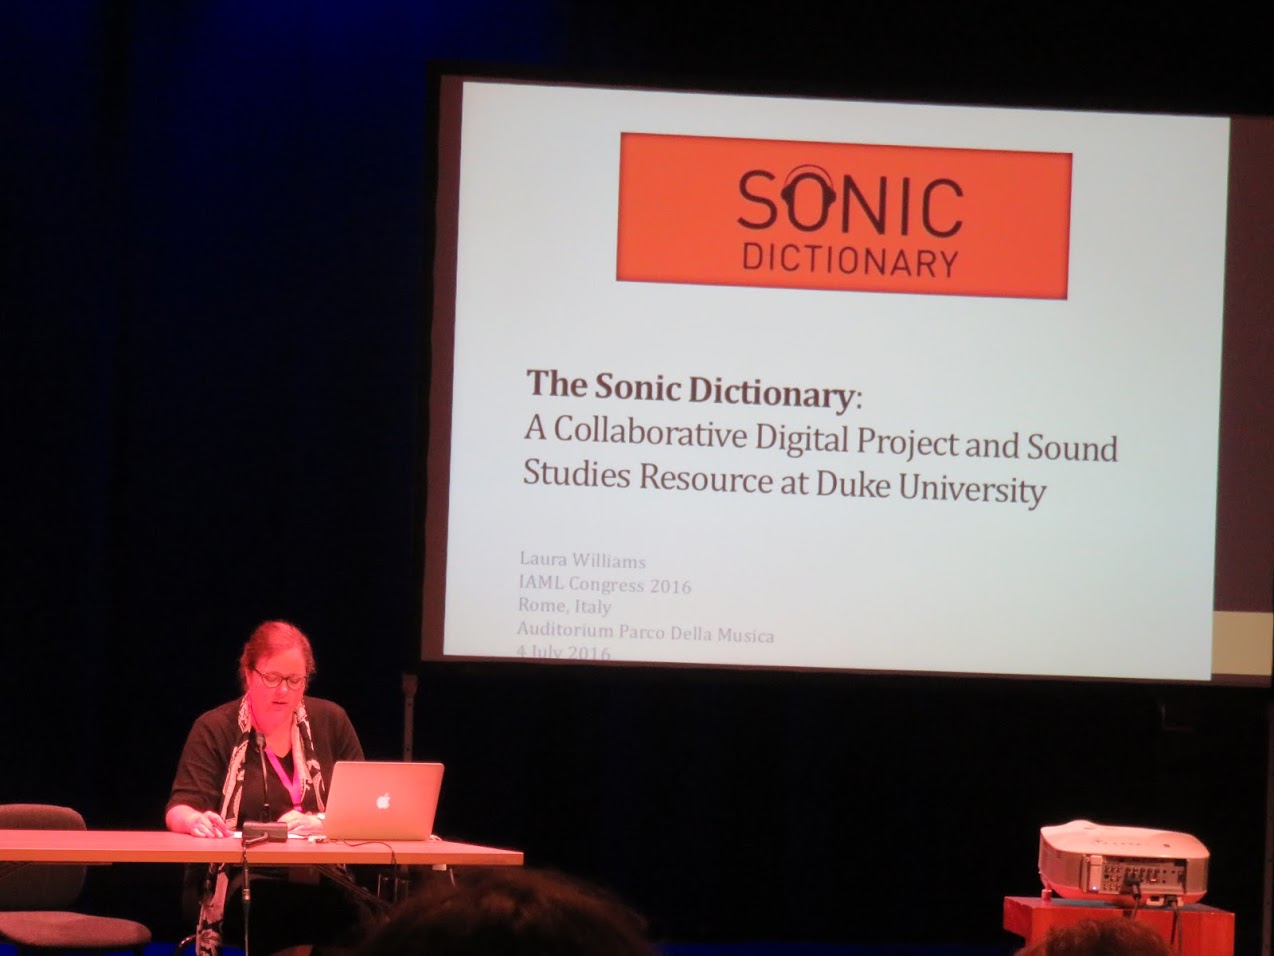 Sonic Dictionary, photo by Marianna Zsoldos